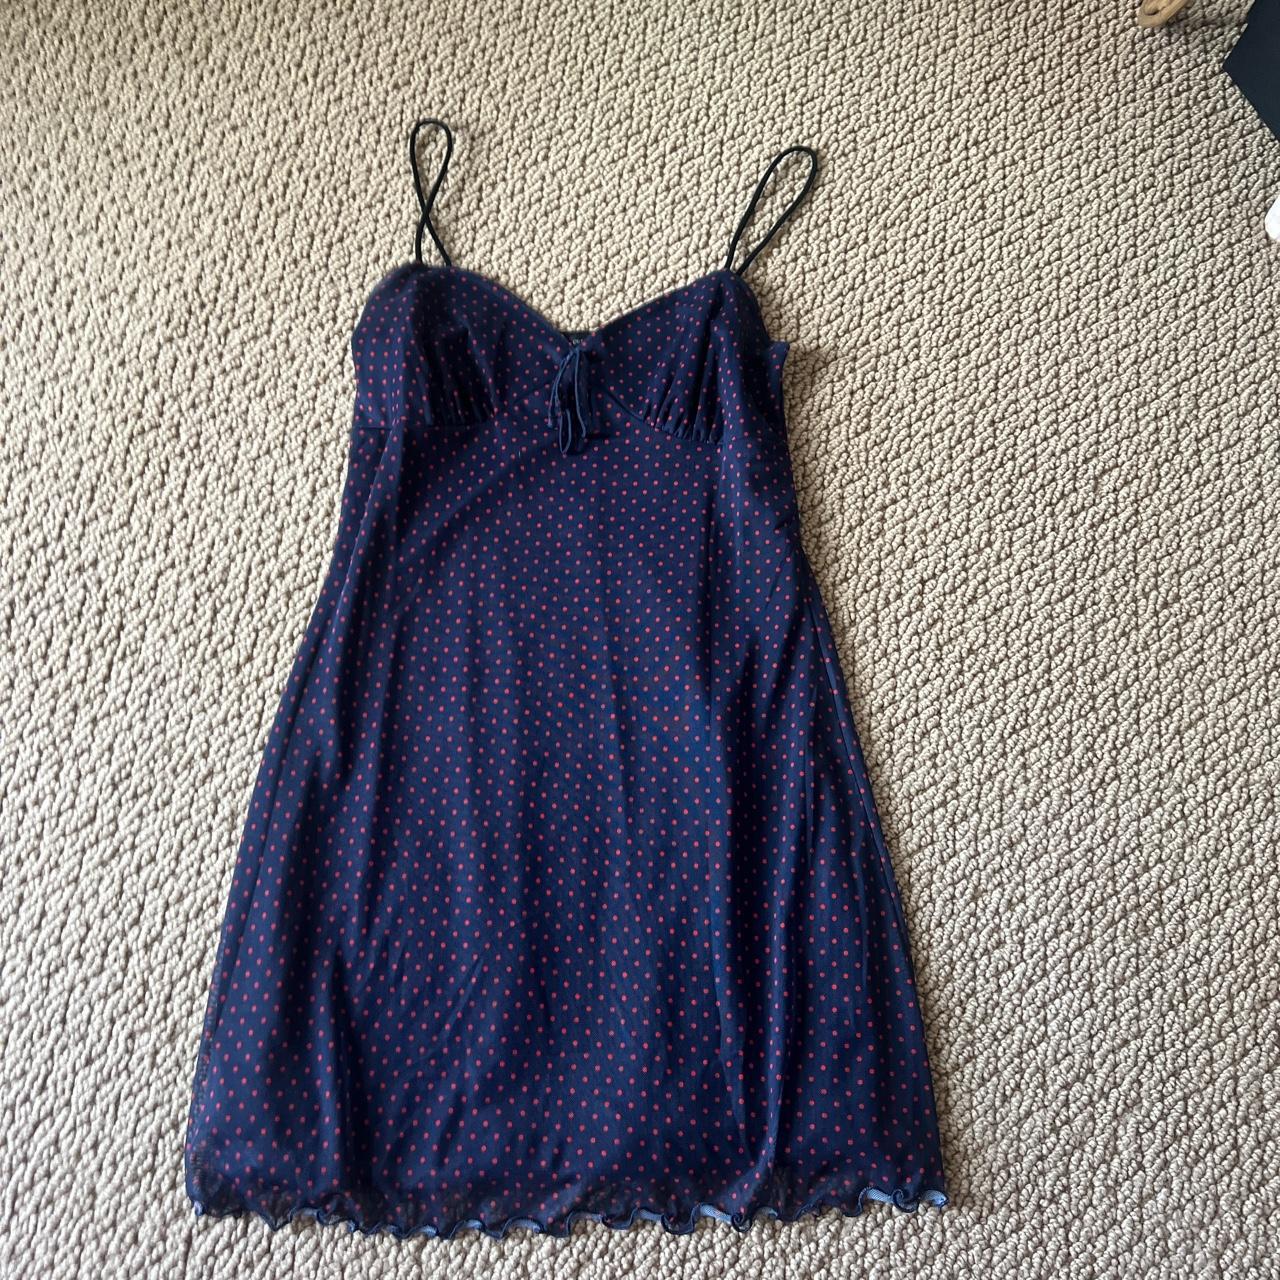 Navy Blue and Red Polka Dot Urban Outfitters Dress -... - Depop